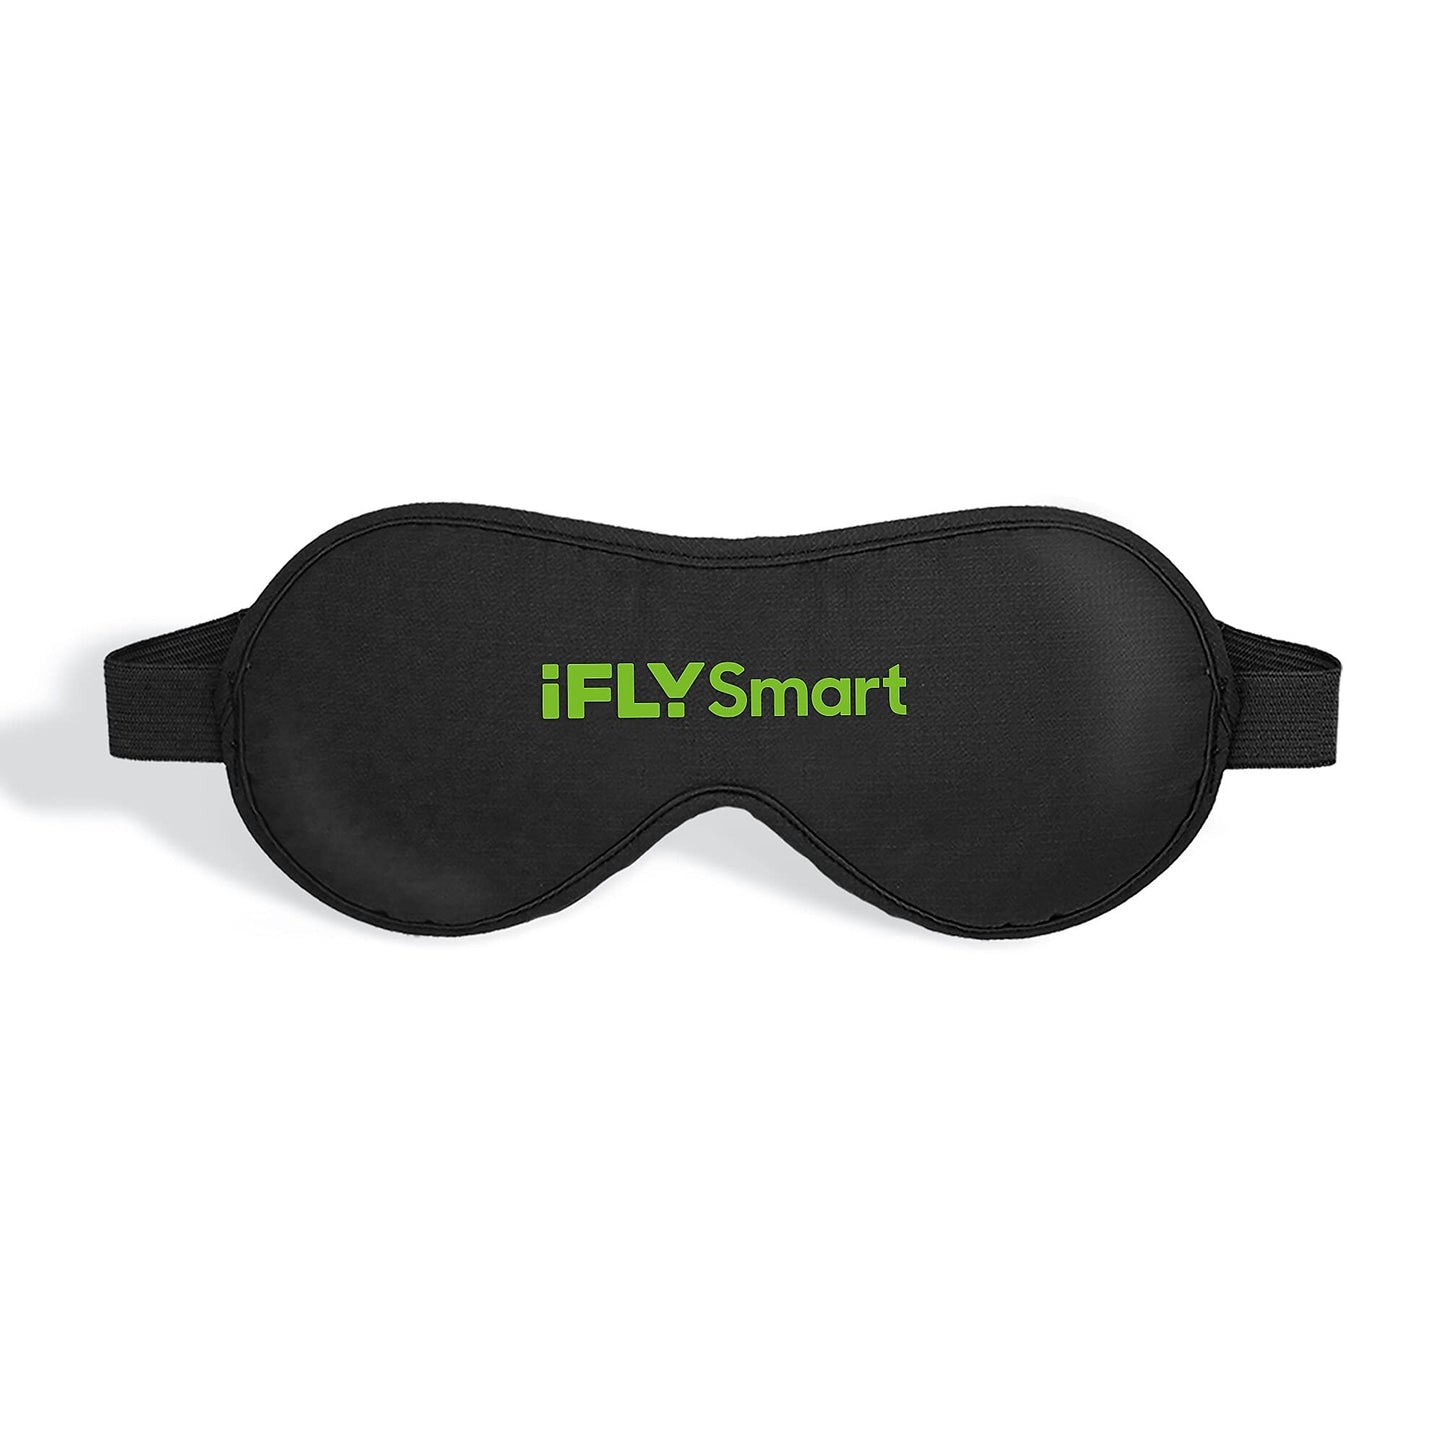 iFly Smart 9A001HK iFly Healthy Kit, Multicolored, One Size